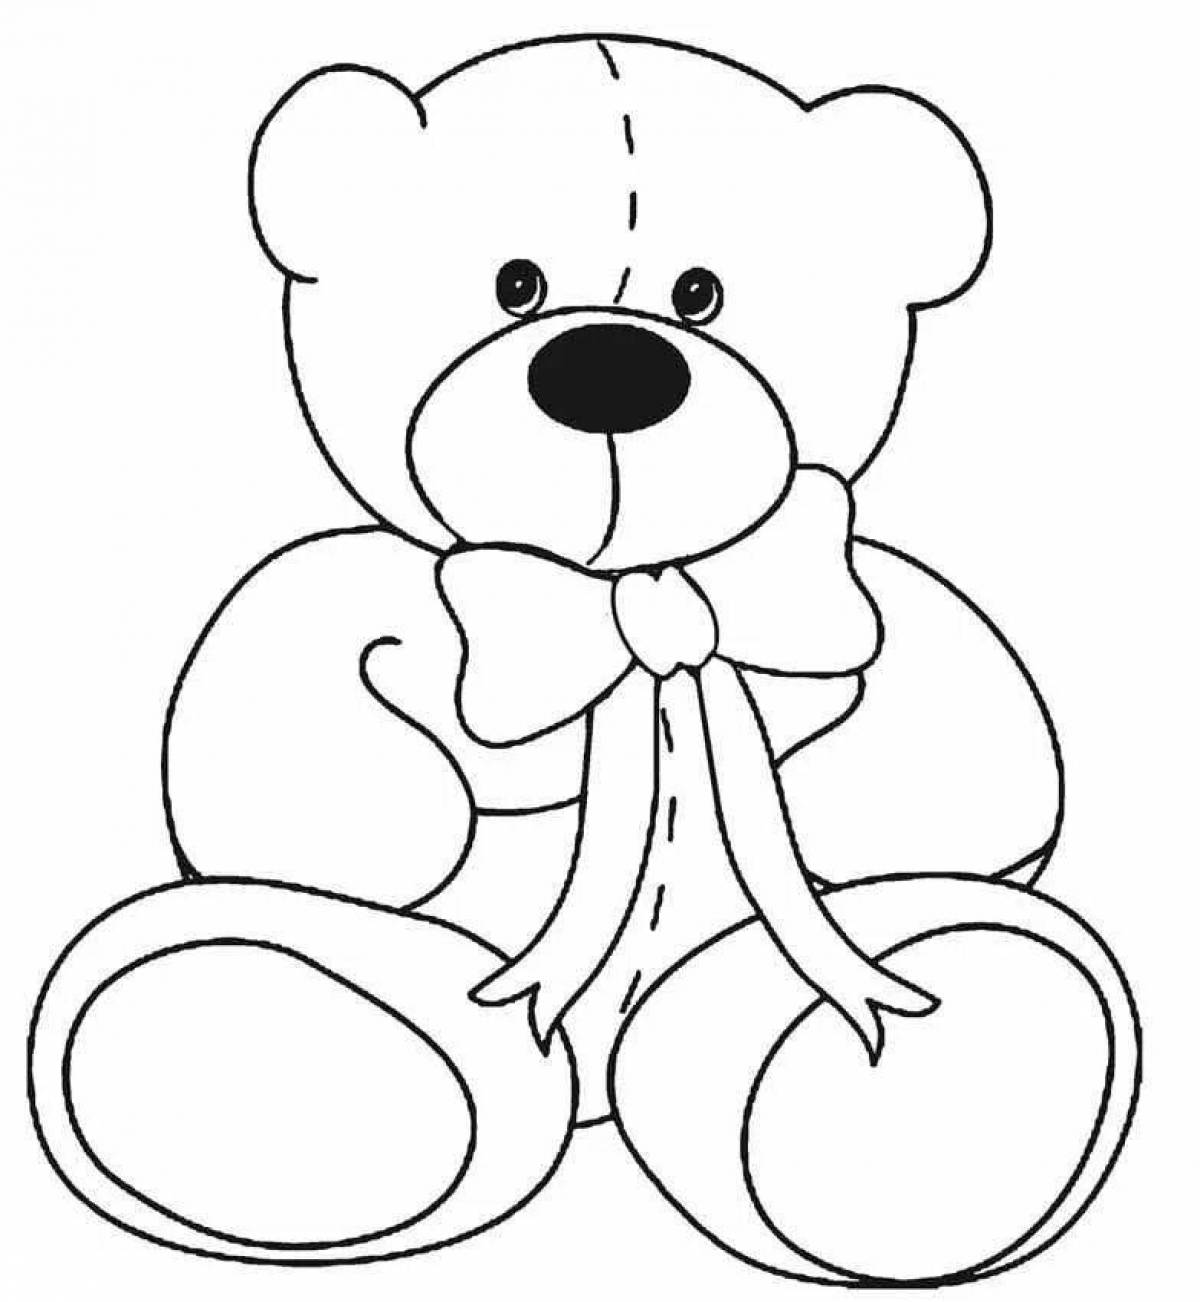 Squeezable teddy bear coloring page